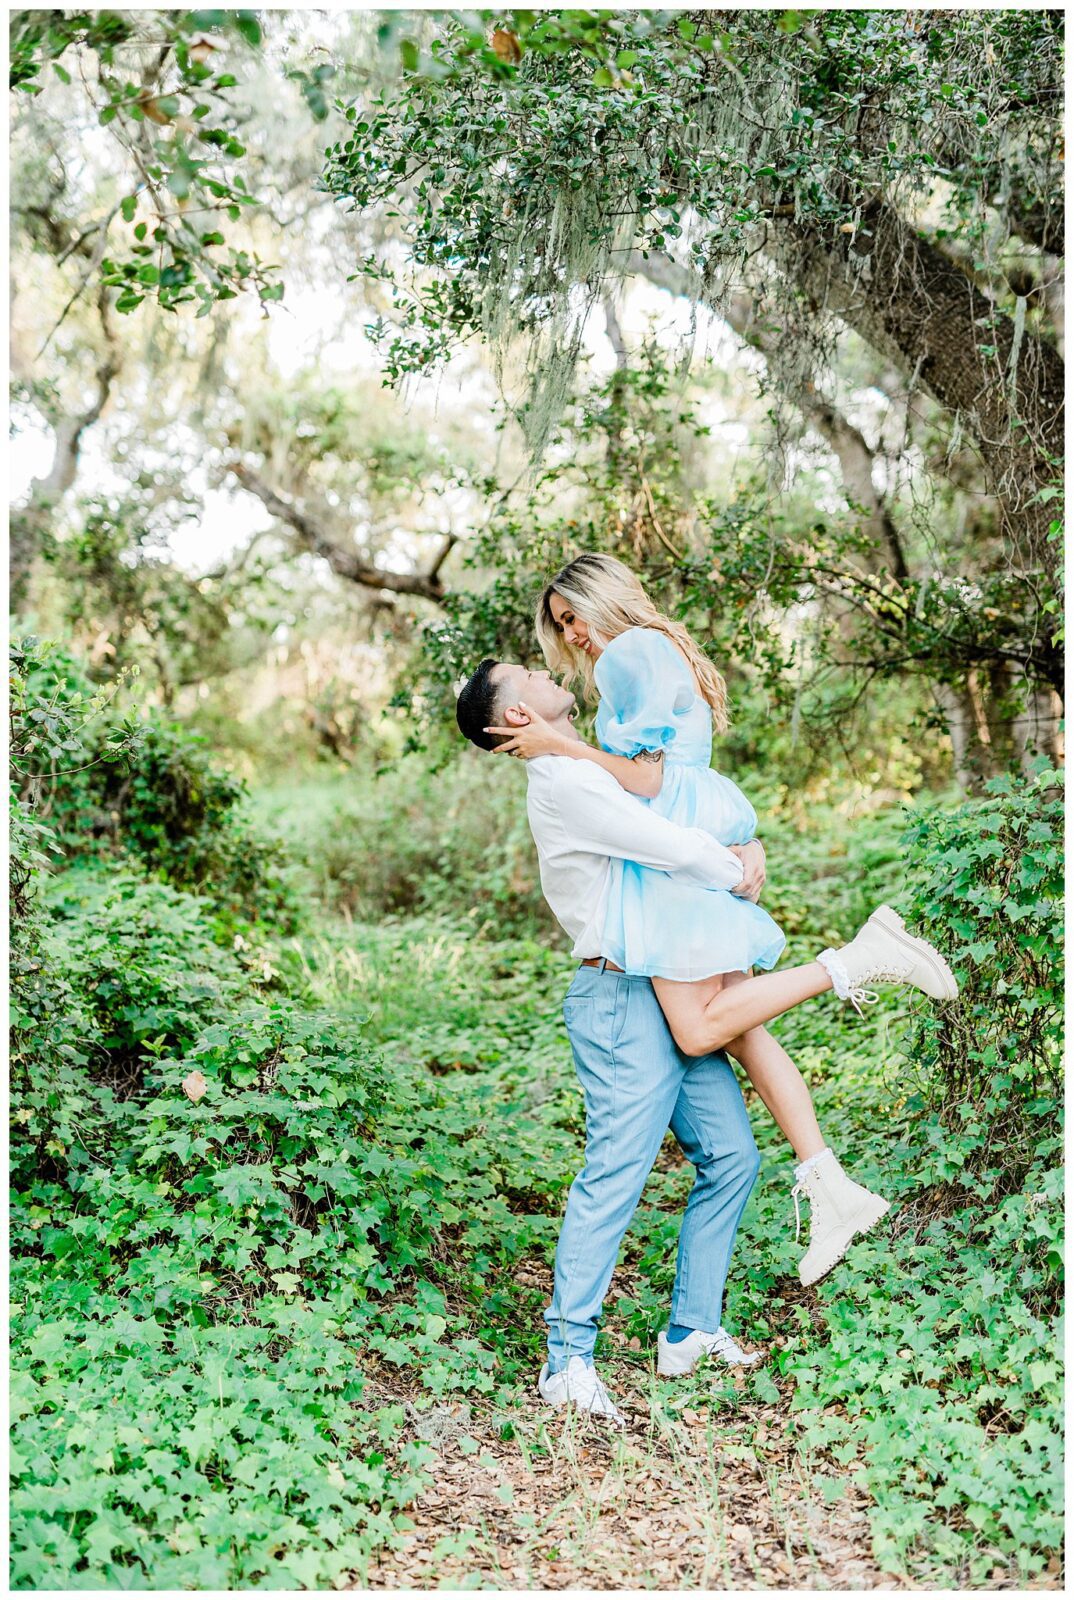 A fun and whimsical moment between an engaged couple during their central coast engagement session as the groom lifts the bride into their air and they laugh for an engagement pose. 